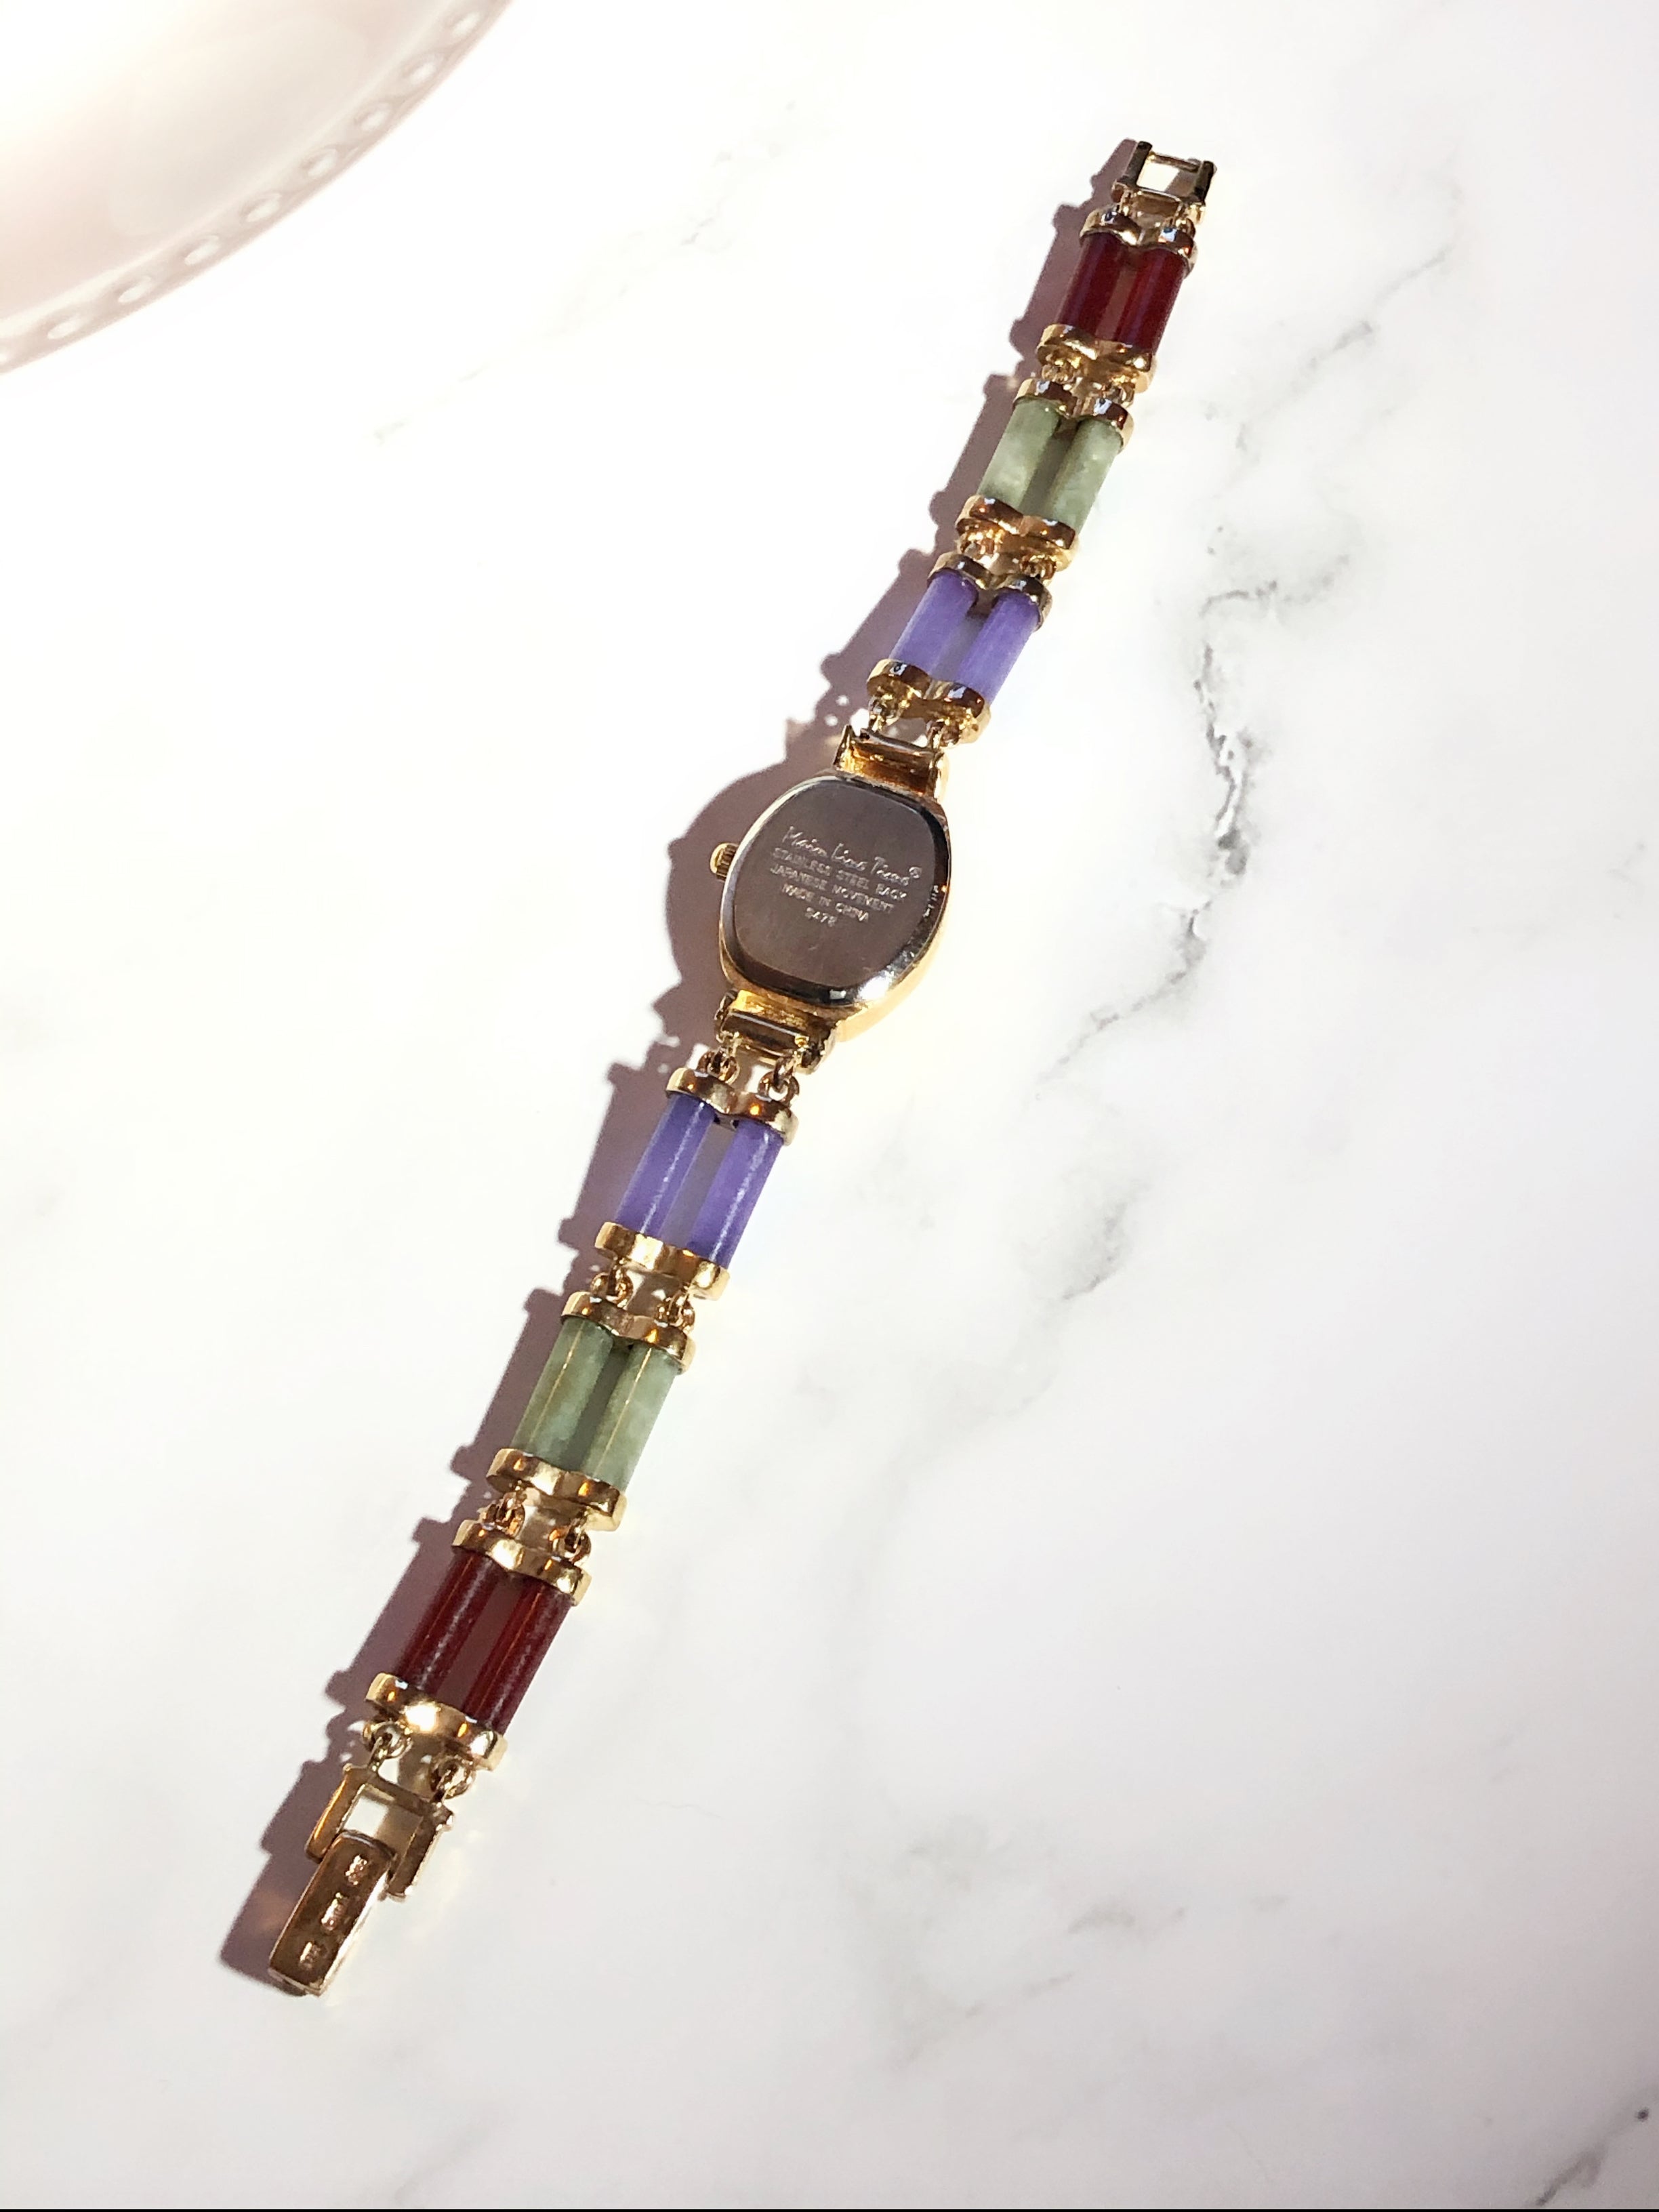 Main Line Time Multi-Color Jade & Mother of Pearl Gold Watch